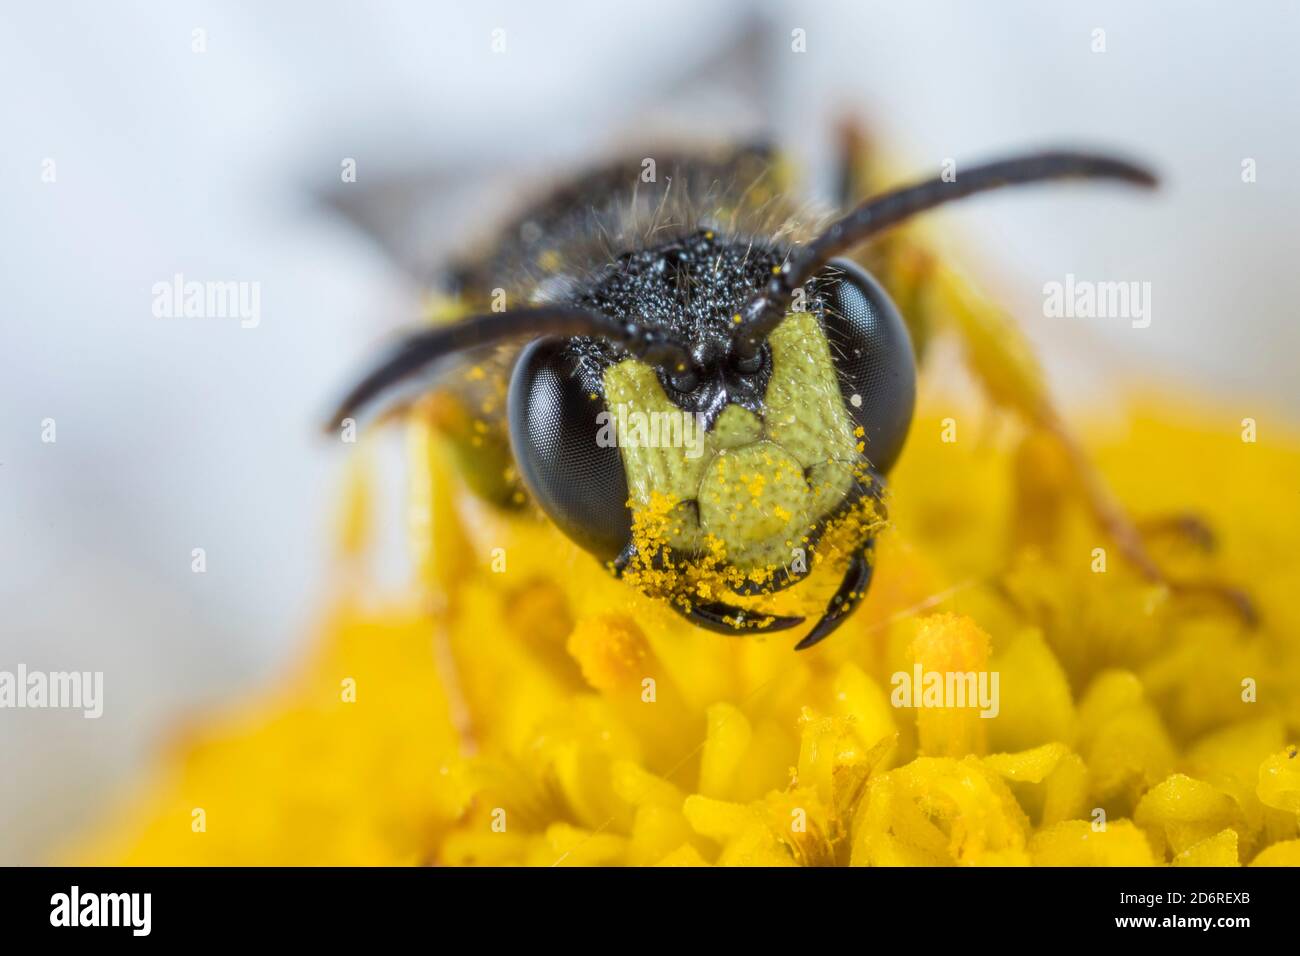 Ornate Tailed Digger Wasp (Cerceris rybyensis), male, portrait, Germany Stock Photo